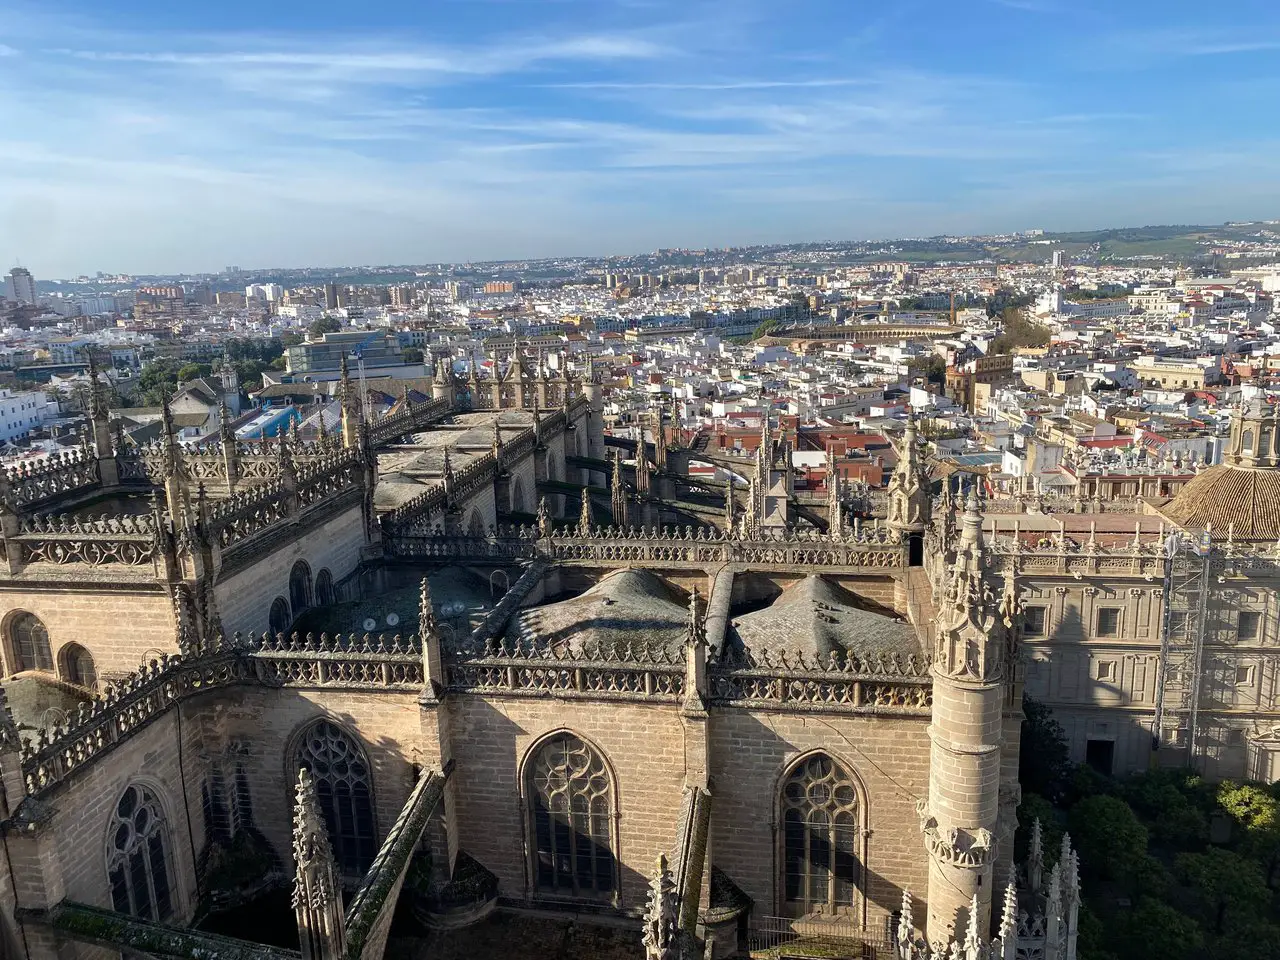 Aerial view of Seville skyline with the Seville Cathedral in the foreground.